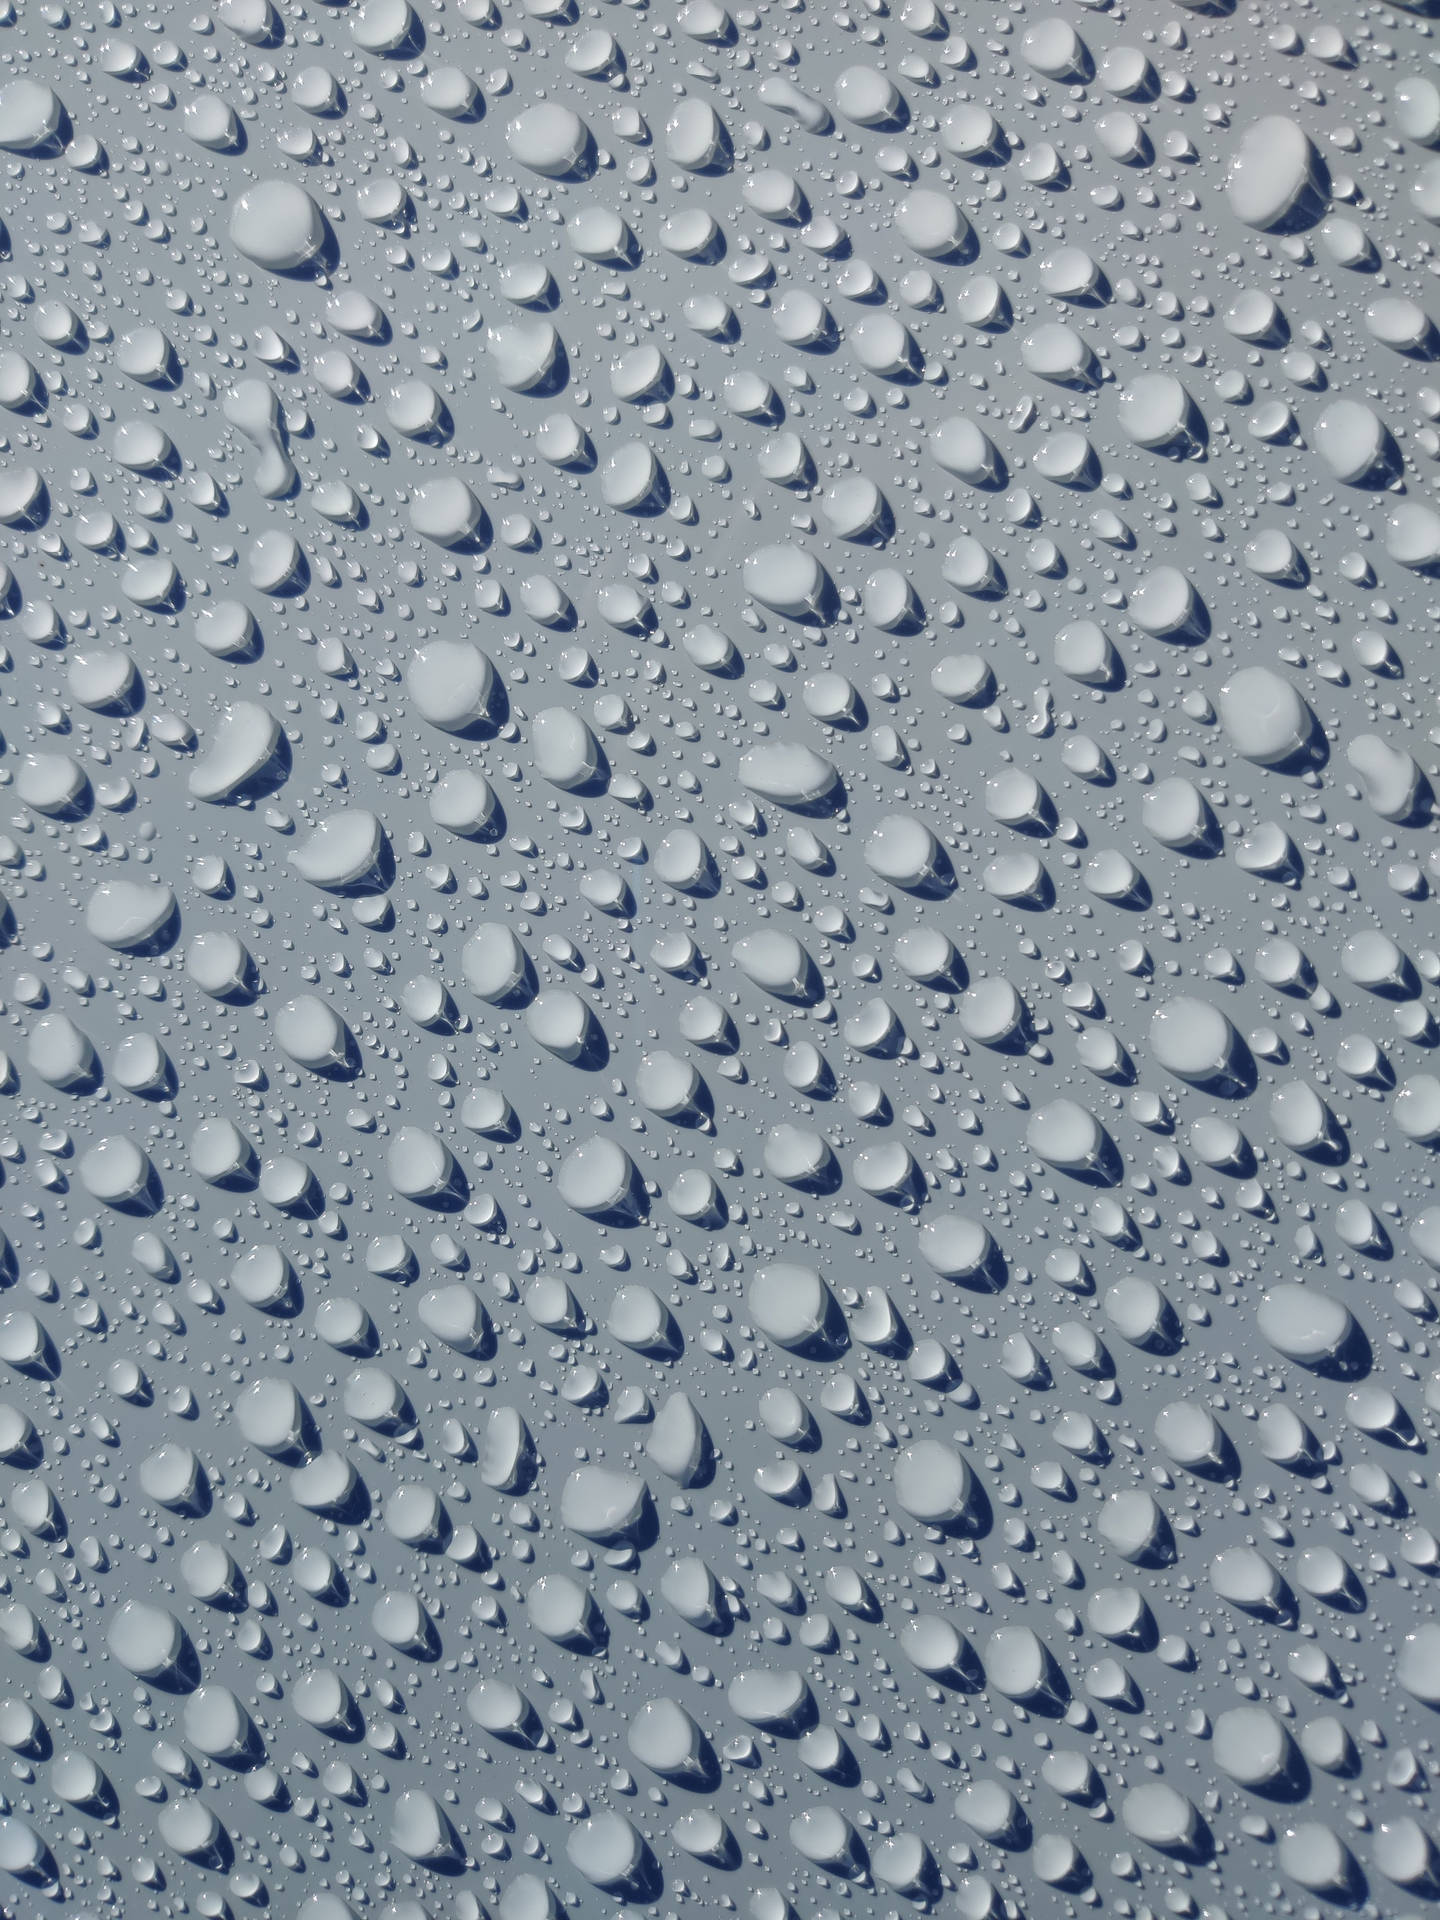 Textured Water Droplets Background